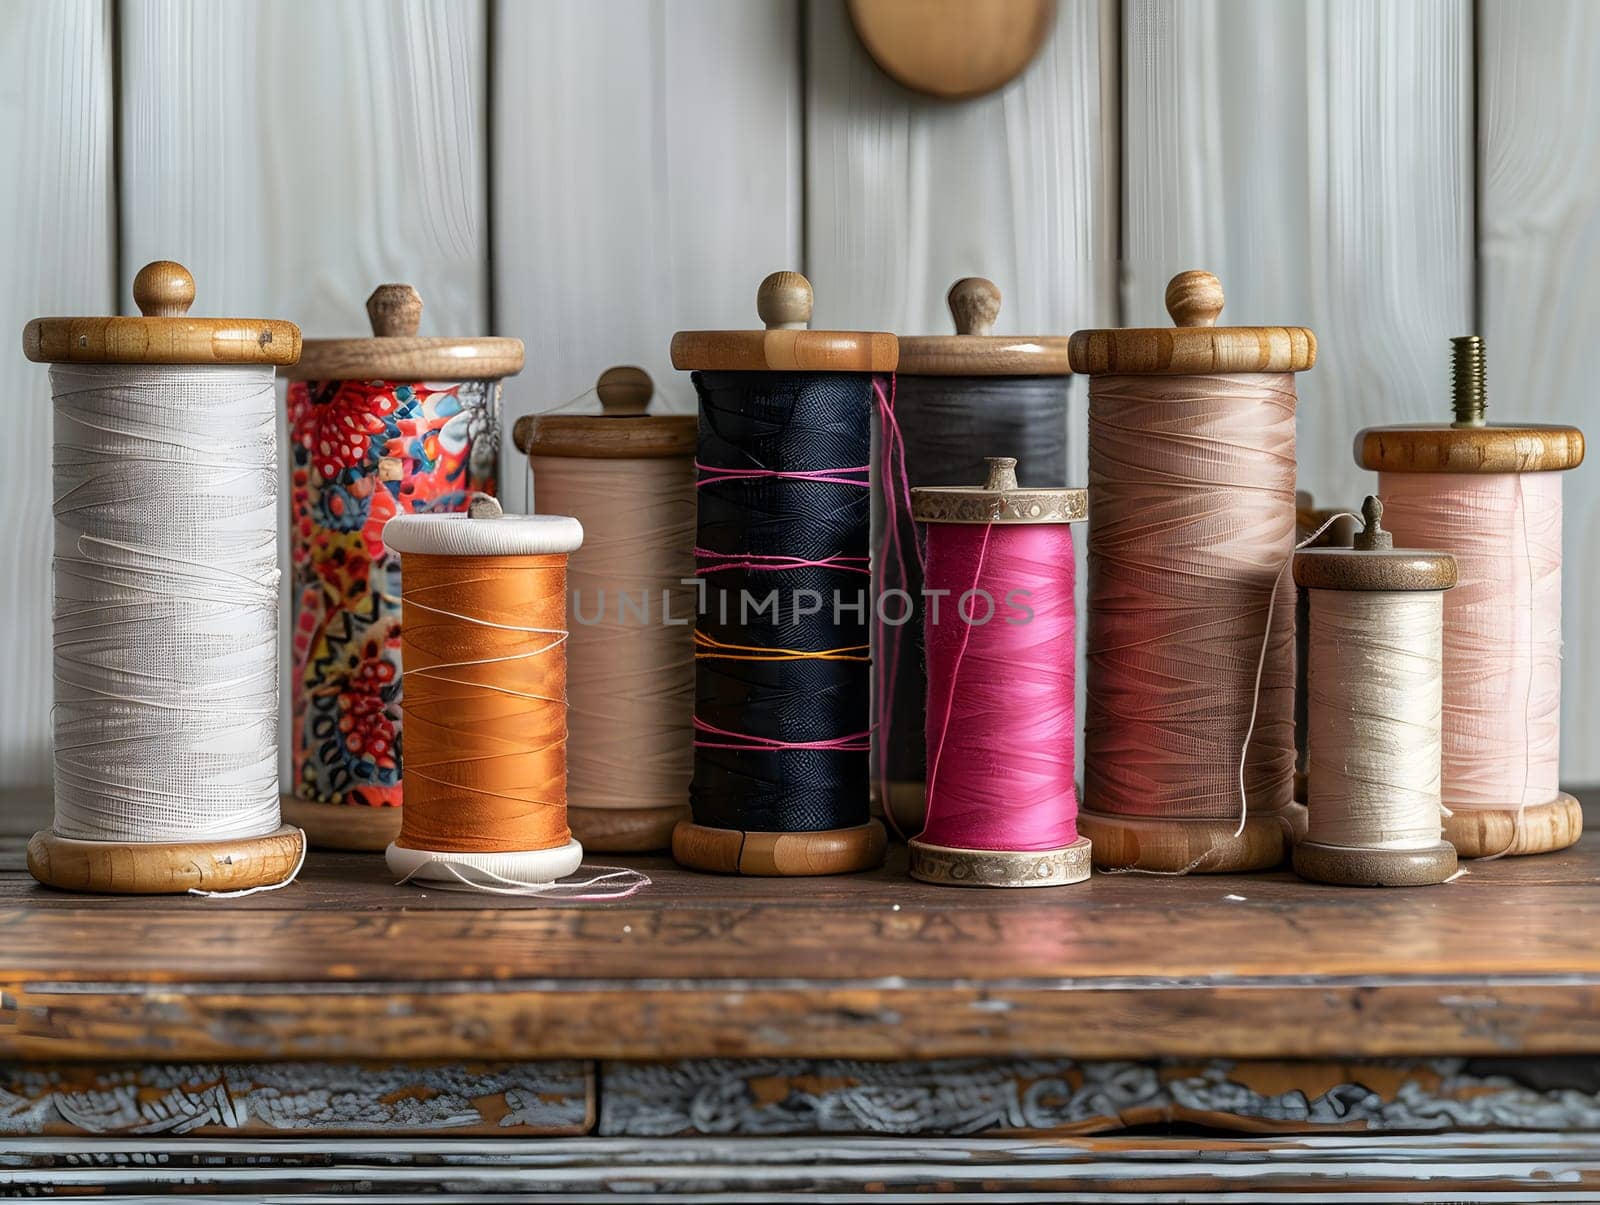 Multiple spools of thread in various colors are neatly arranged on a wooden table. The rich wood stain enhances the beauty of the display, creating a visually appealing fashion accessory